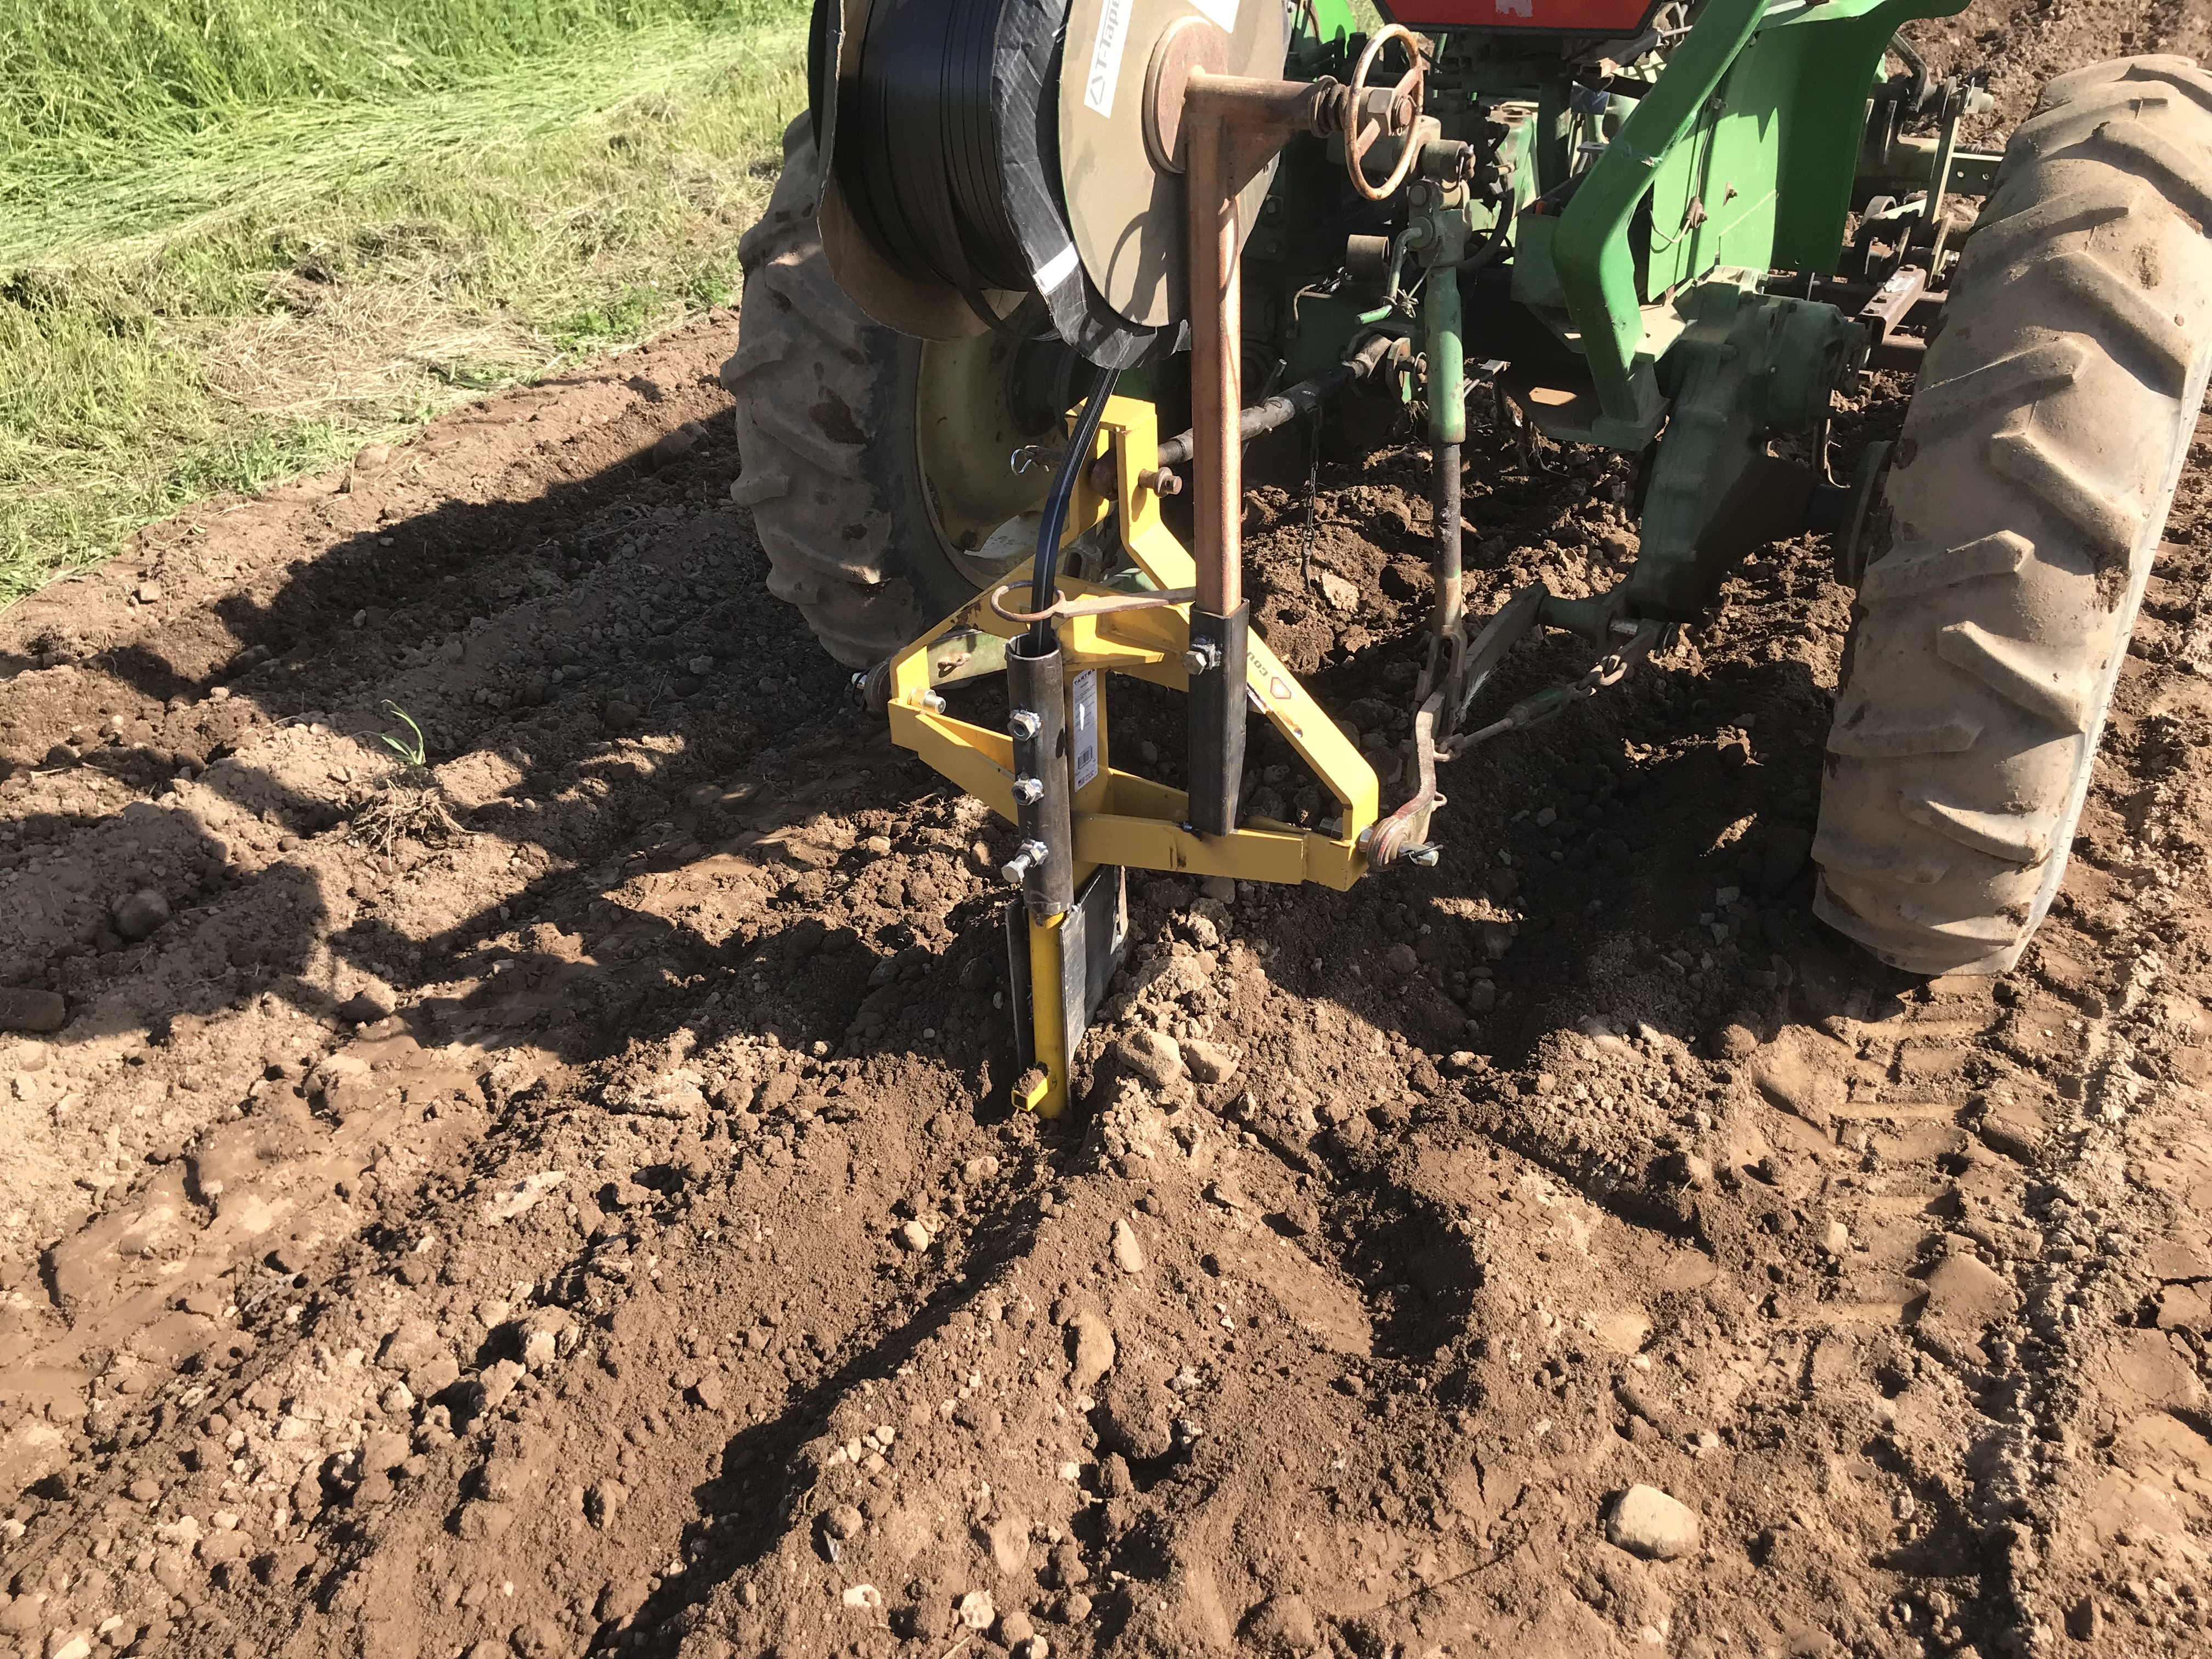 Installation of subsurface drip irrigation lines at Cecarelli Farms. | Photo by William DellaCamera